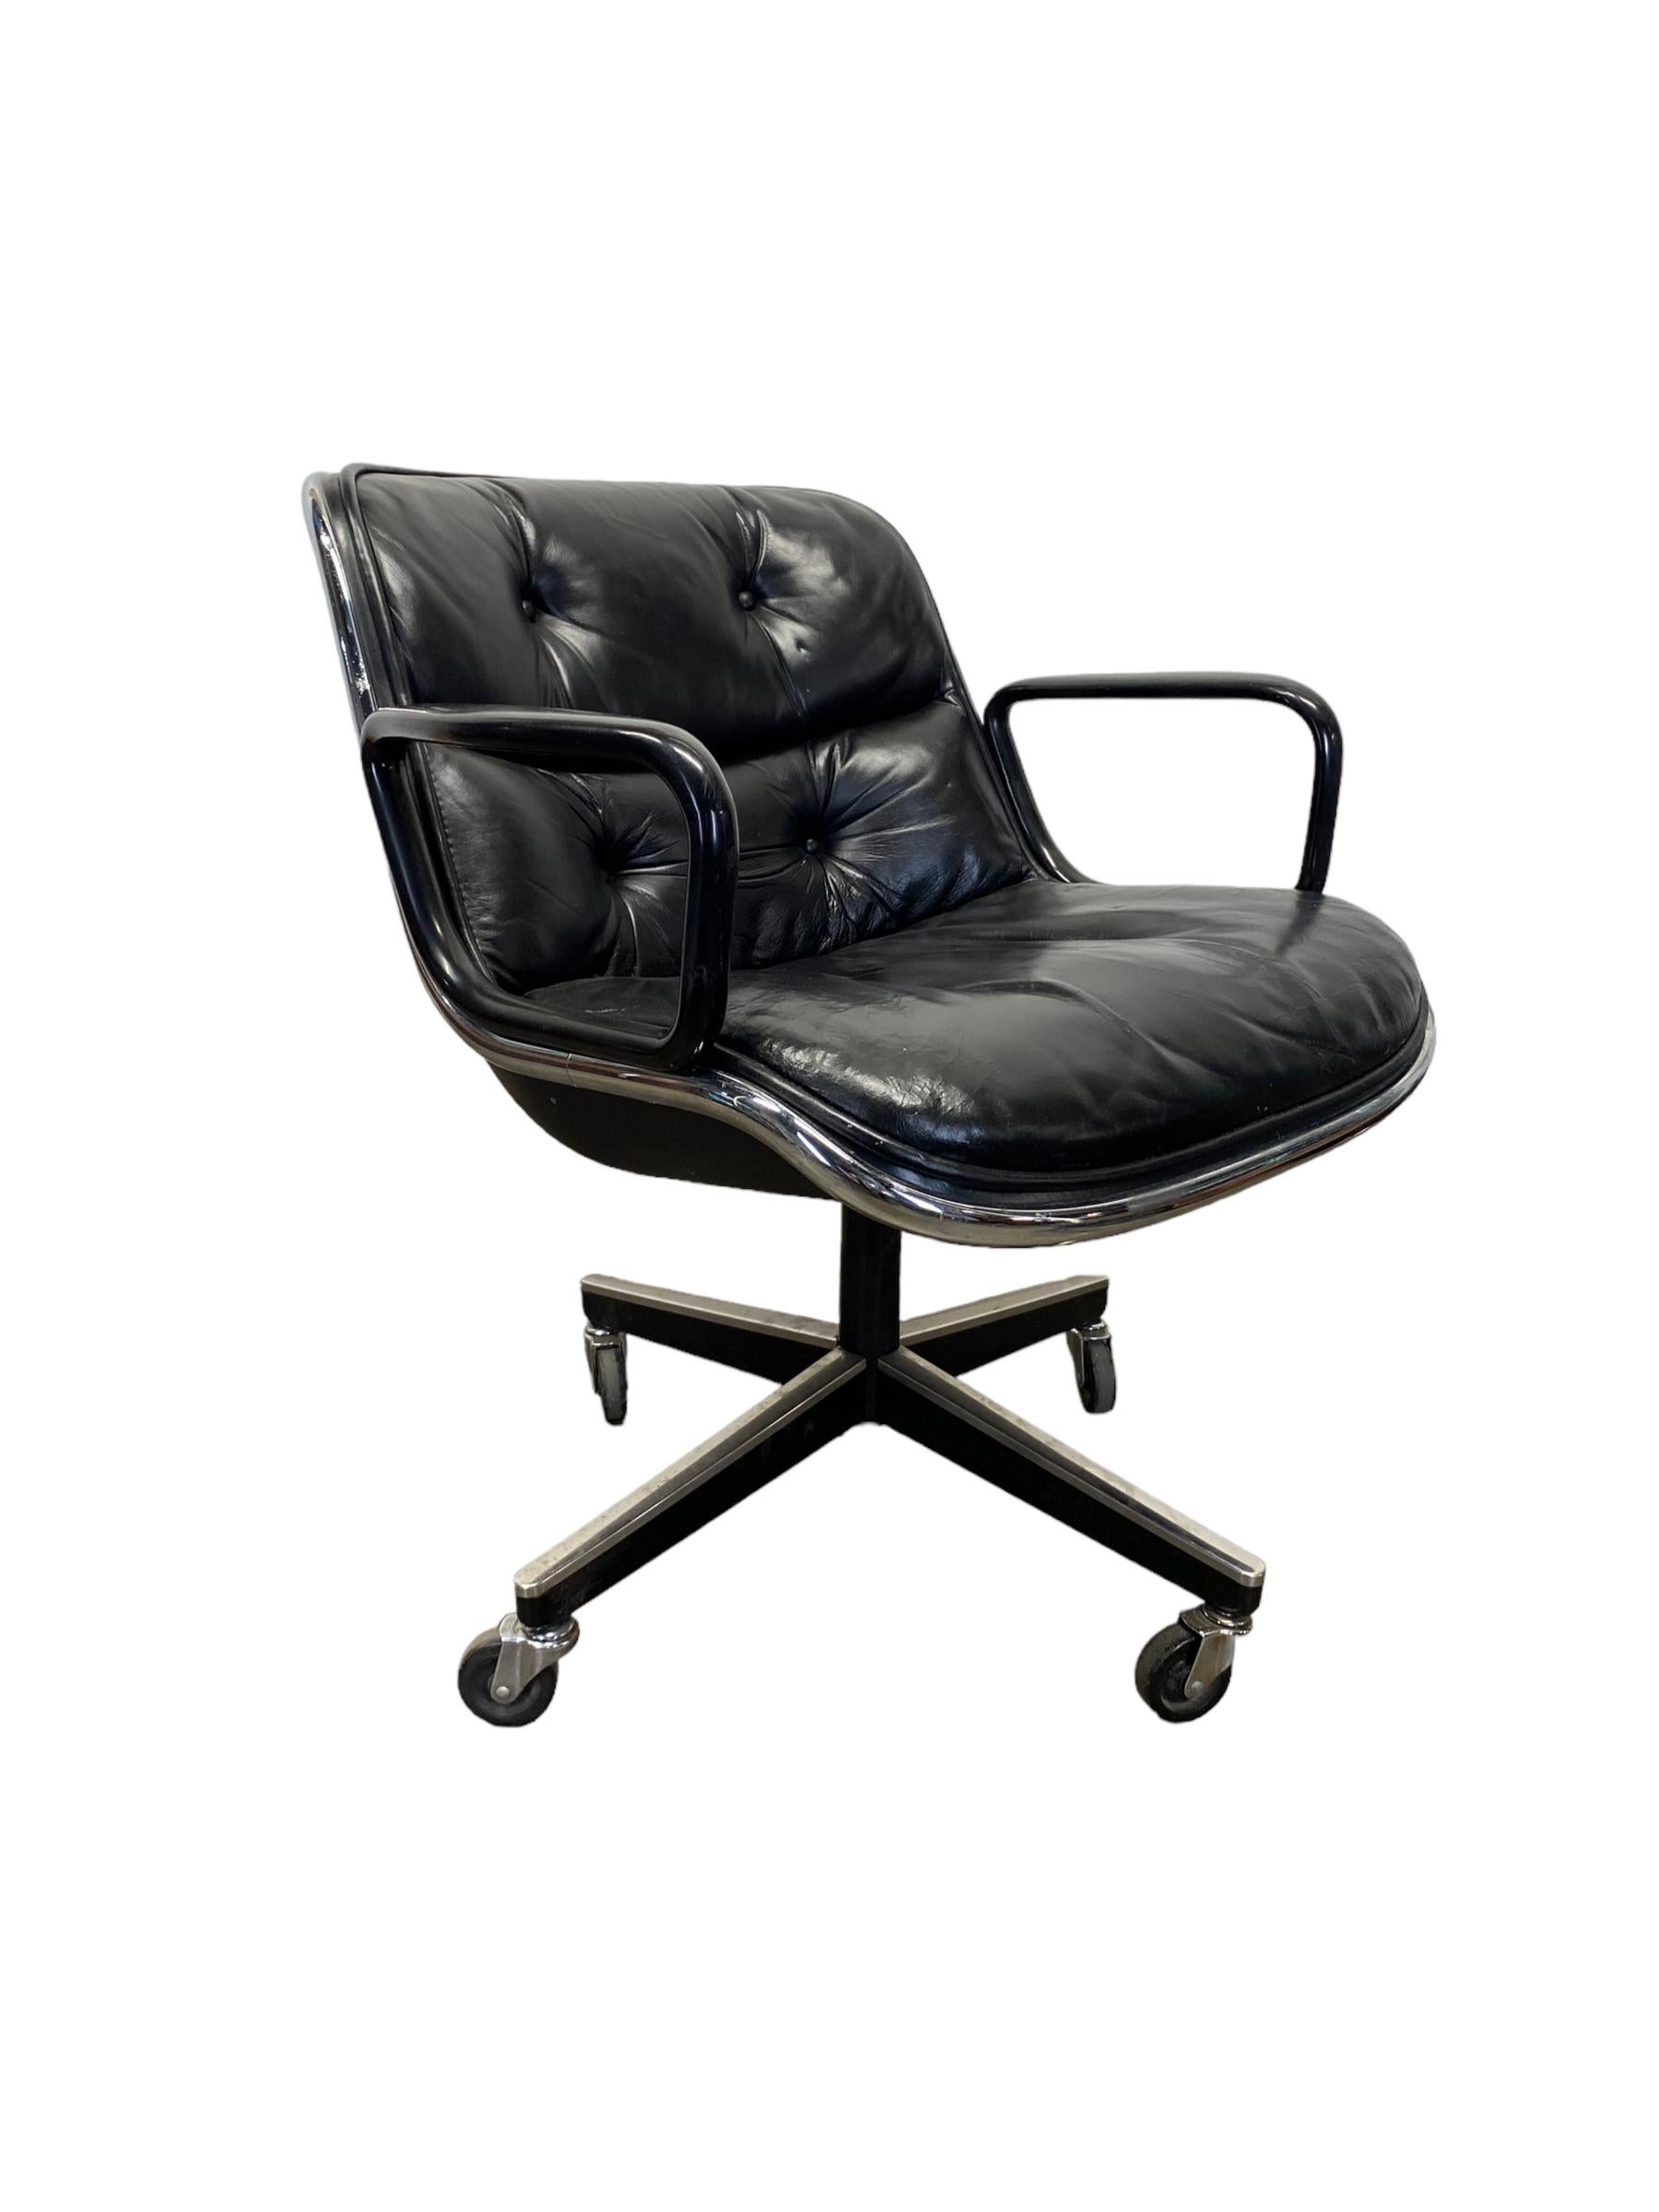 Mid-Century Modern Charles Pollock Executive Chair in Black Leather For Sale